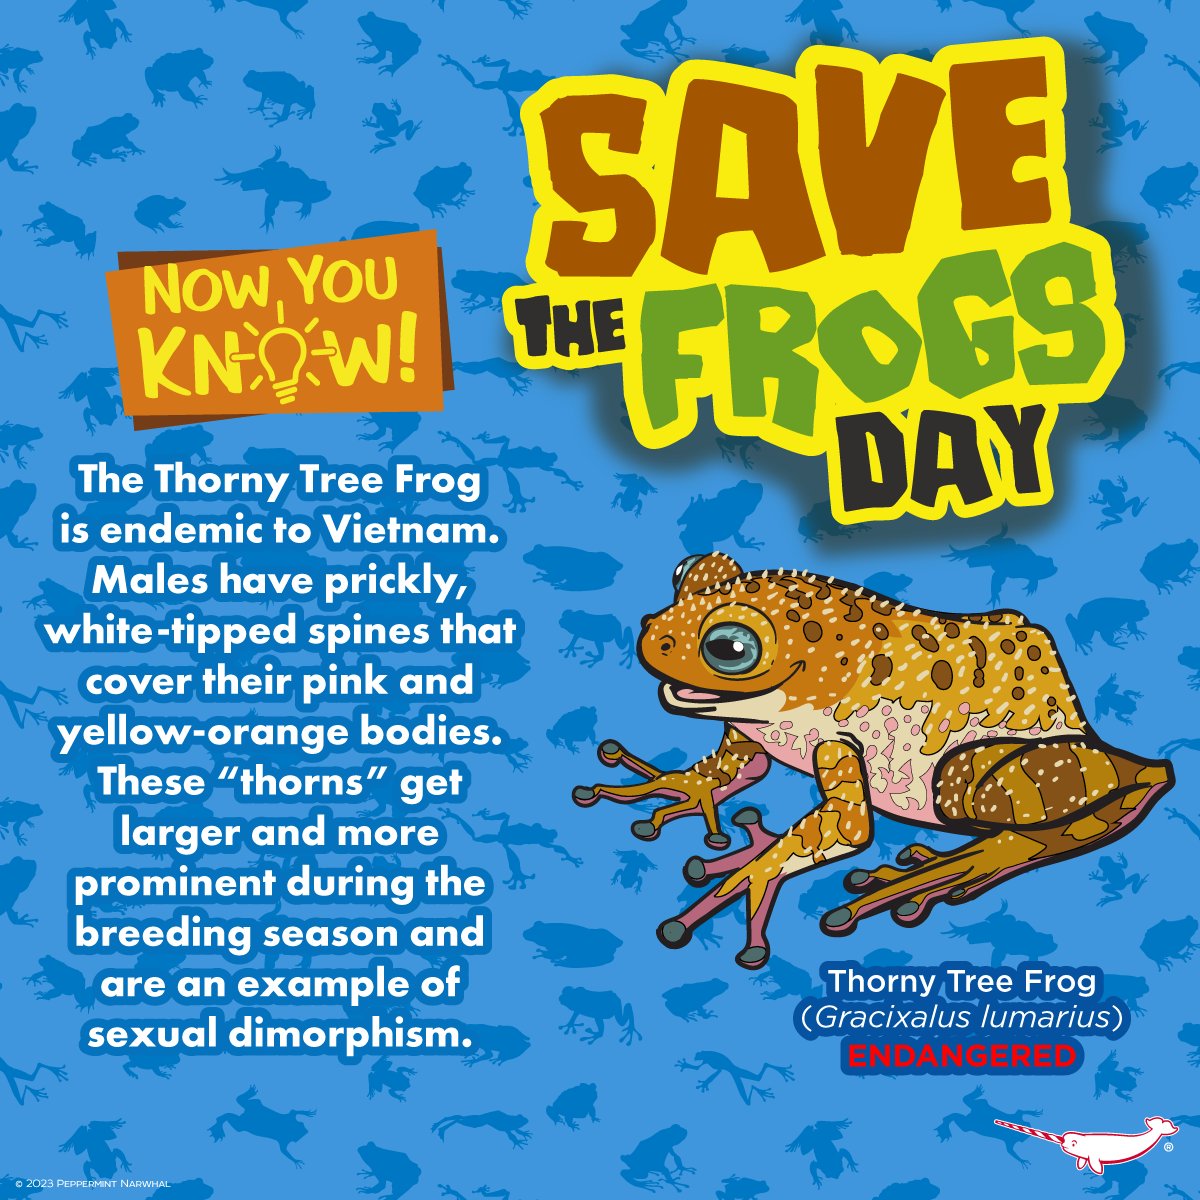 #SaveTheFrogDay
#NowYouKnow #ThornyTreeFrog

#Frog & #Amphibian Merch:
rb.gy/oeyii9

SALE - Save 20% Off Everything in the #PeppermintNarwhal Store.
Shop: peppermintnarwhal.com
Ends 4/30/24.

Int'l Shoppers visit our Etsy store:
etsy.com/shop/Peppermin…